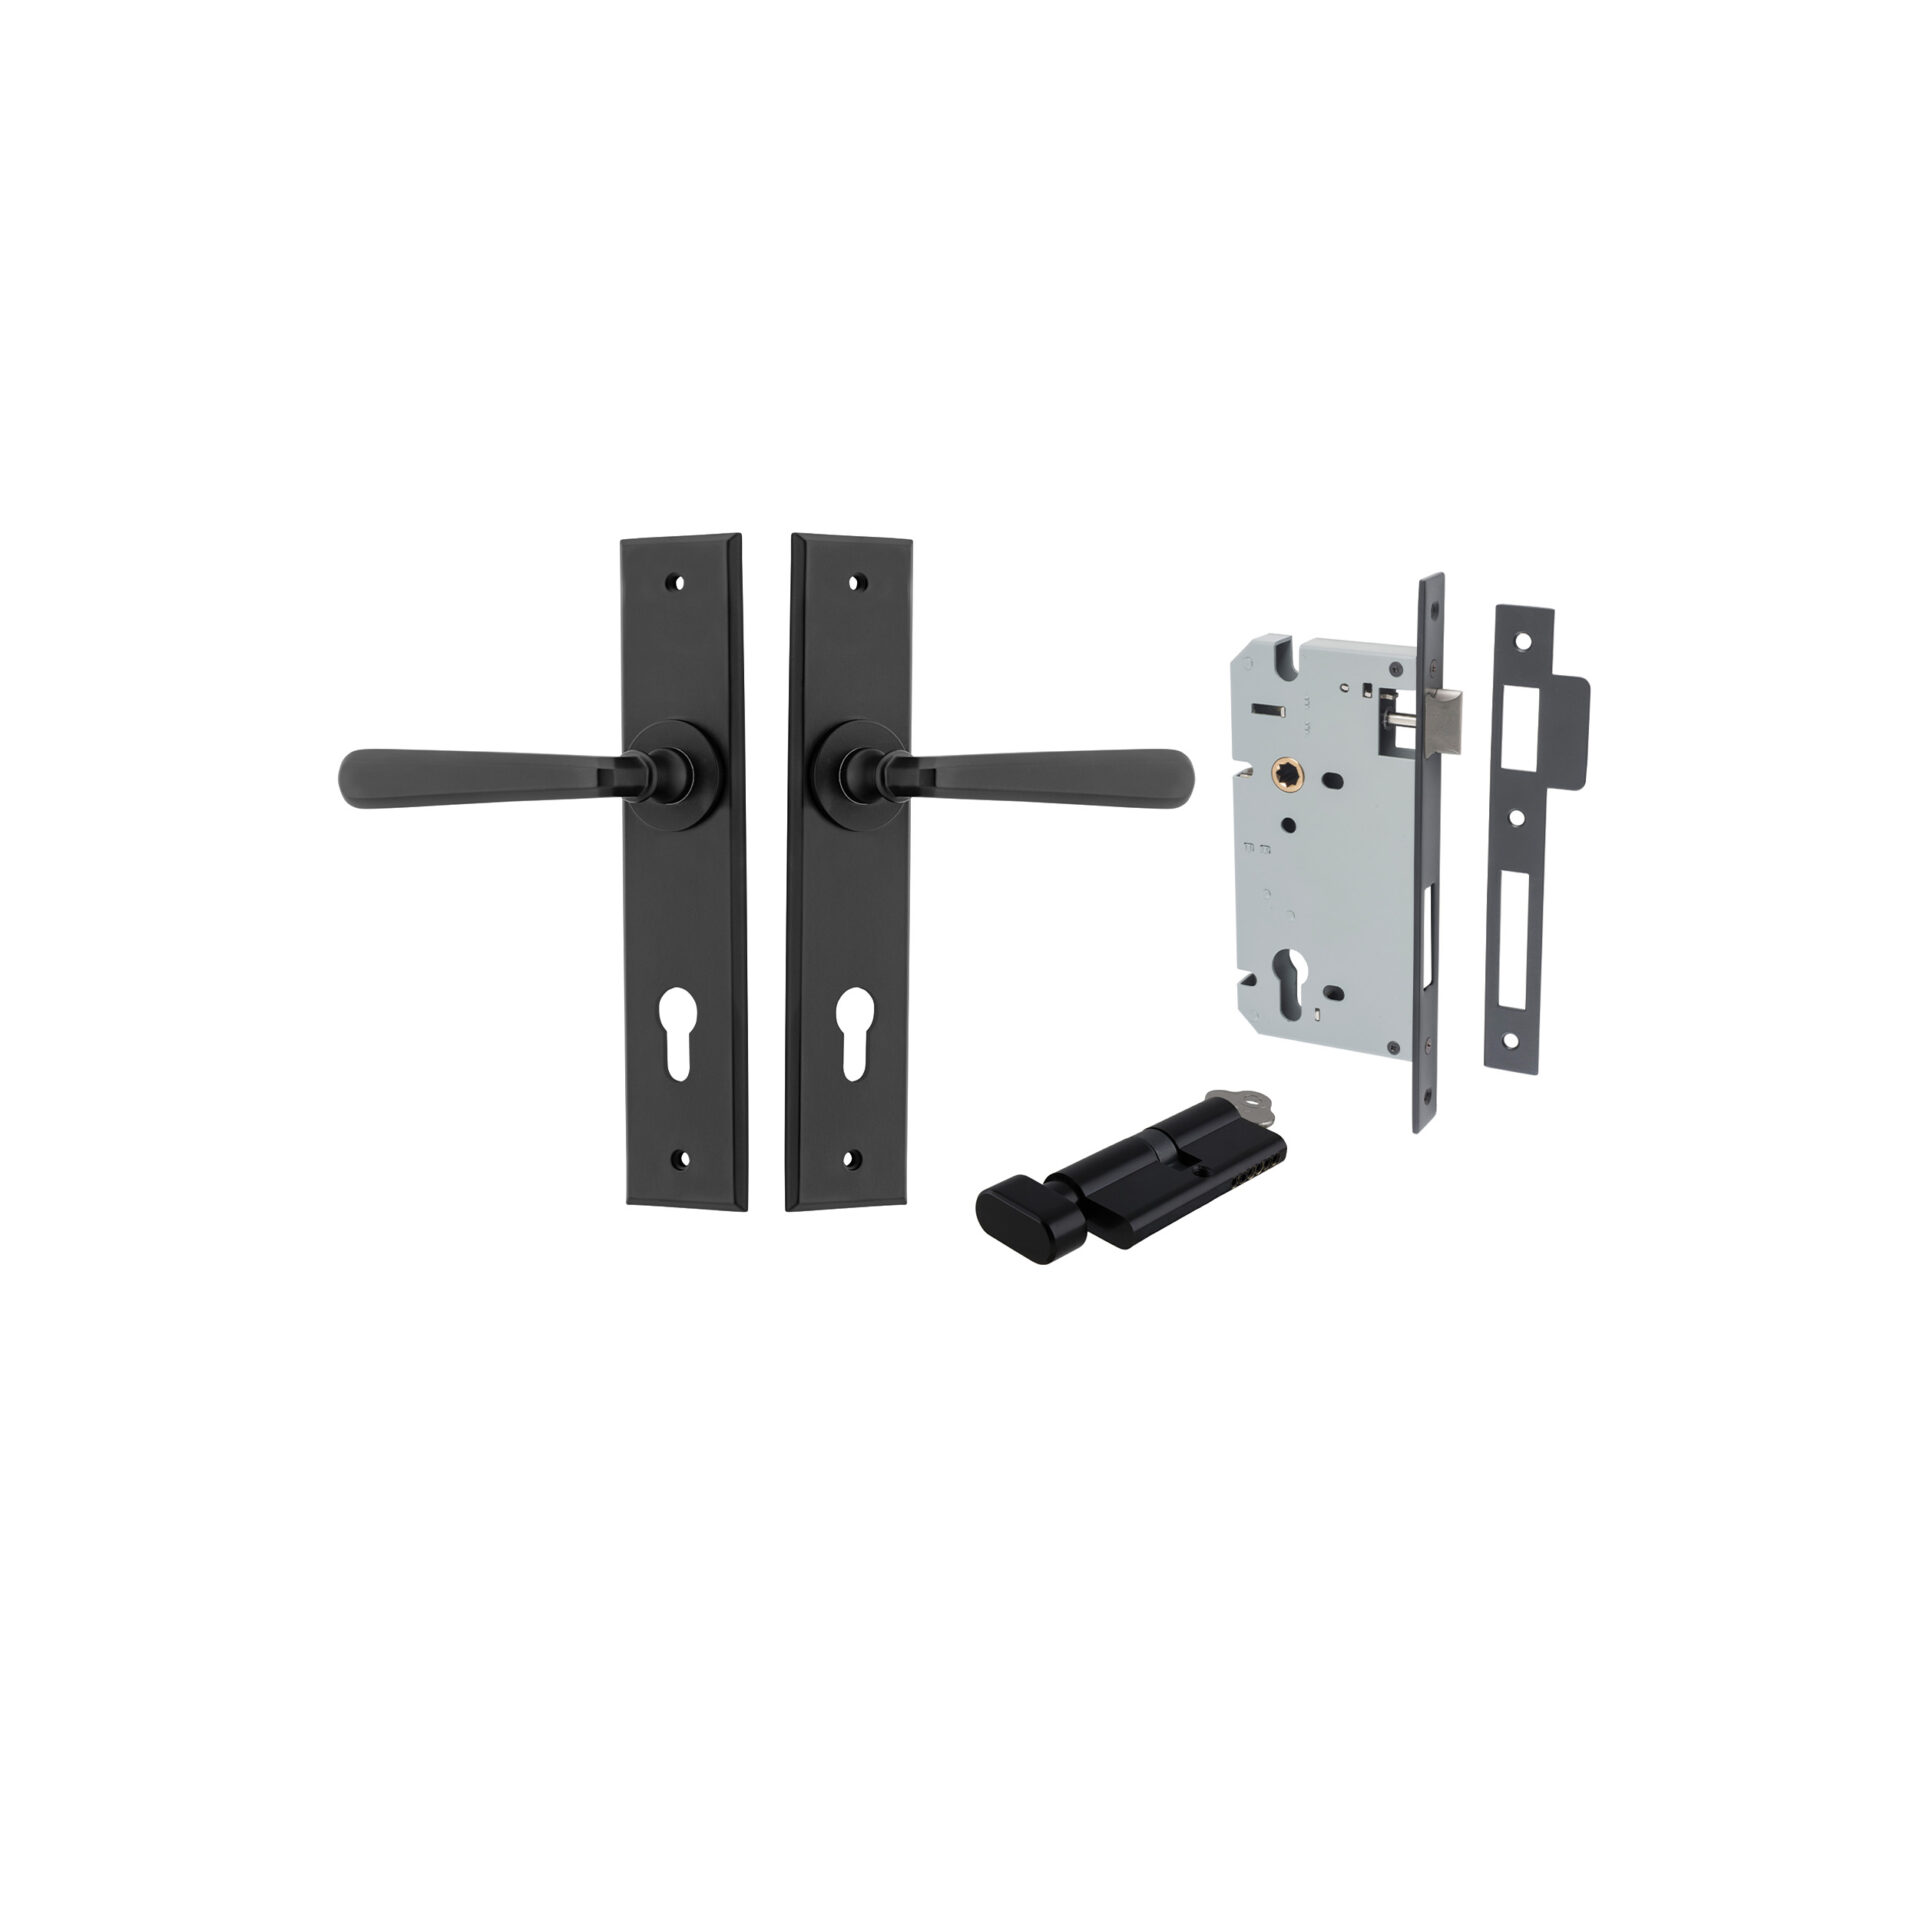 Copenhagen Lever - Chamfered Backplate Entrance Kit with High Security Lock